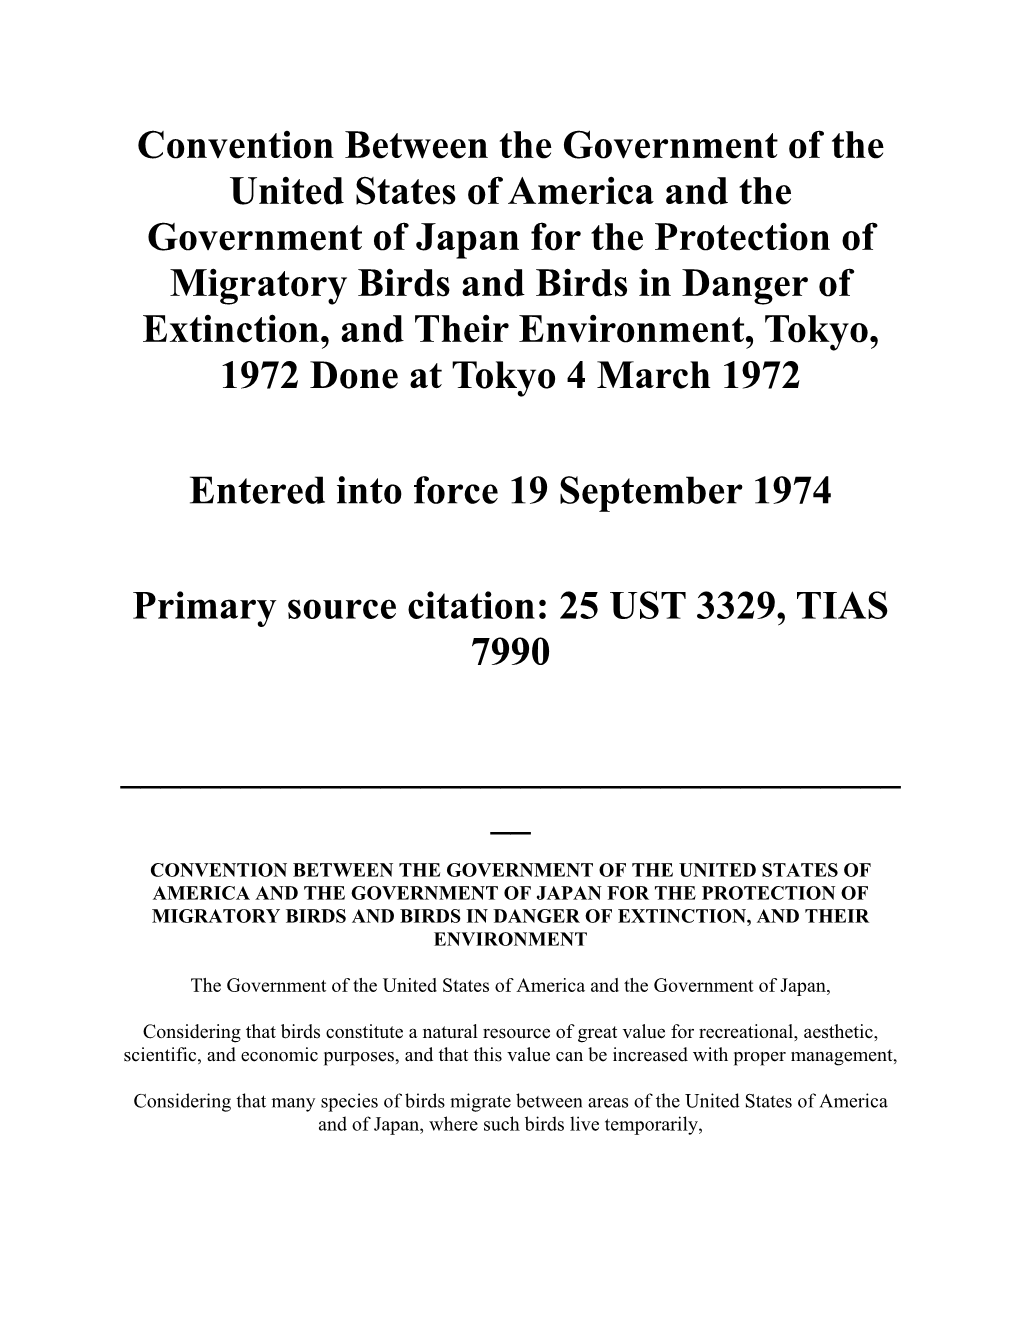 Convention Between the Government of the United States of America And